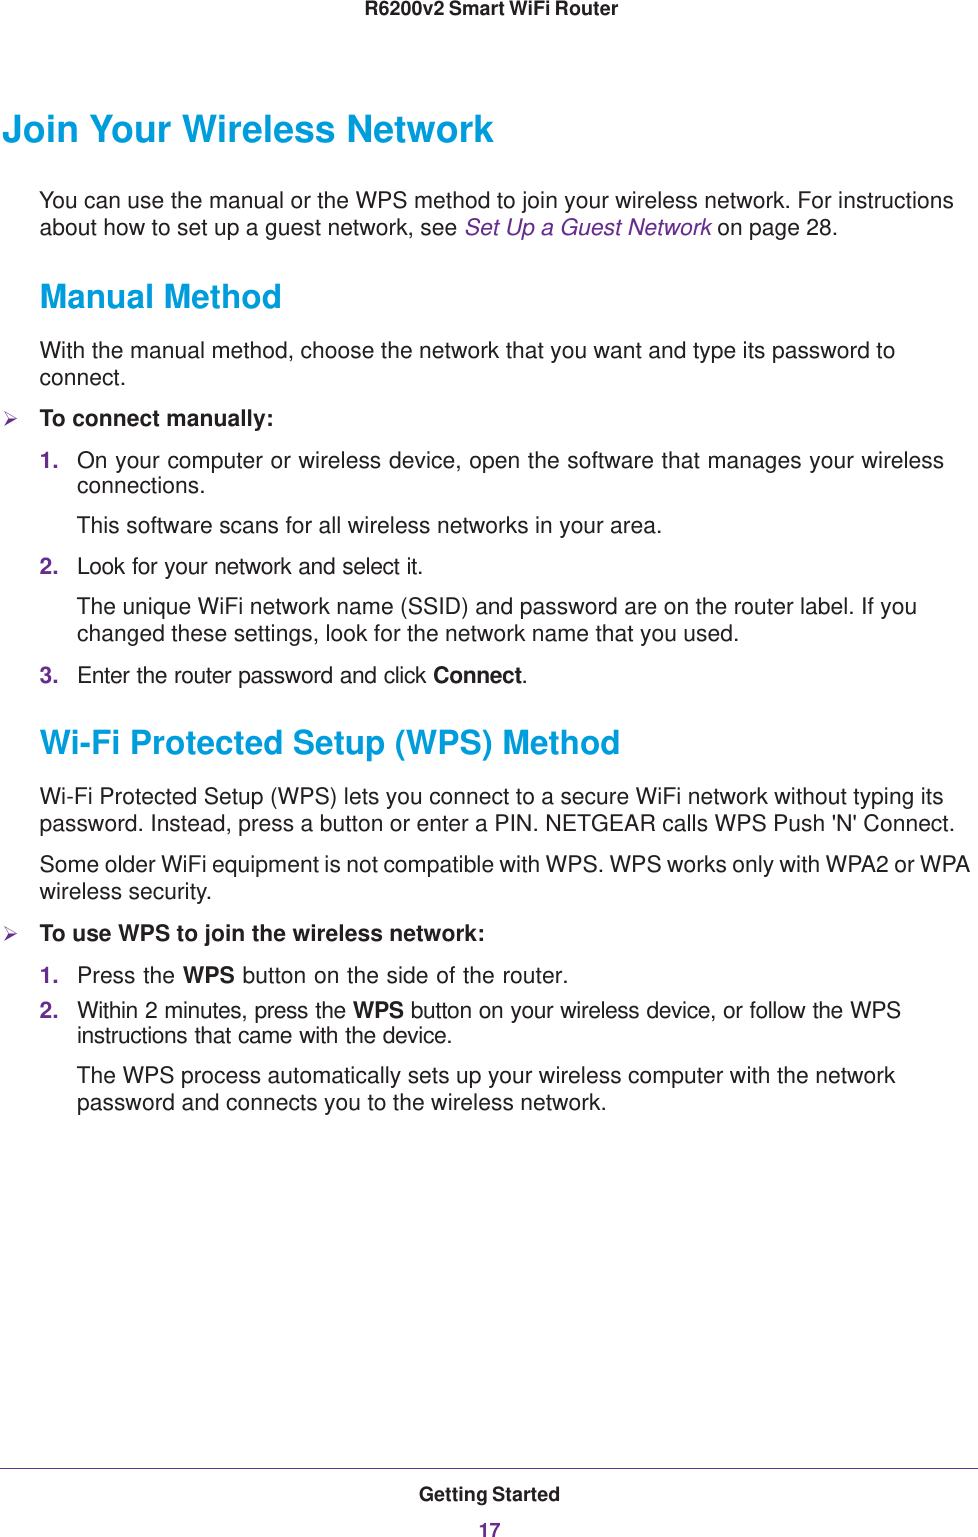 Getting Started17 R6200v2 Smart WiFi RouterJoin Your Wireless NetworkYou can use the manual or the WPS method to join your wireless network. For instructions about how to set up a guest network, see Set Up a Guest Network on page  28.Manual MethodWith the manual method, choose the network that you want and type its password to connect.To connect manually:1. On your computer or wireless device, open the software that manages your wireless connections. This software scans for all wireless networks in your area.2. Look for your network and select it. The unique WiFi network name (SSID) and password are on the router label. If you changed these settings, look for the network name that you used.3. Enter the router password and click Connect.Wi-Fi Protected Setup (WPS) MethodWi-Fi Protected Setup (WPS) lets you connect to a secure WiFi network without typing its password. Instead, press a button or enter a PIN. NETGEAR calls WPS Push &apos;N&apos; Connect.Some older WiFi equipment is not compatible with WPS. WPS works only with WPA2 or WPA wireless security.To use WPS to join the wireless network:1. Press the WPS button on the side of the router.2. Within 2 minutes, press the WPS button on your wireless device, or follow the WPS instructions that came with the device. The WPS process automatically sets up your wireless computer with the network password and connects you to the wireless network.